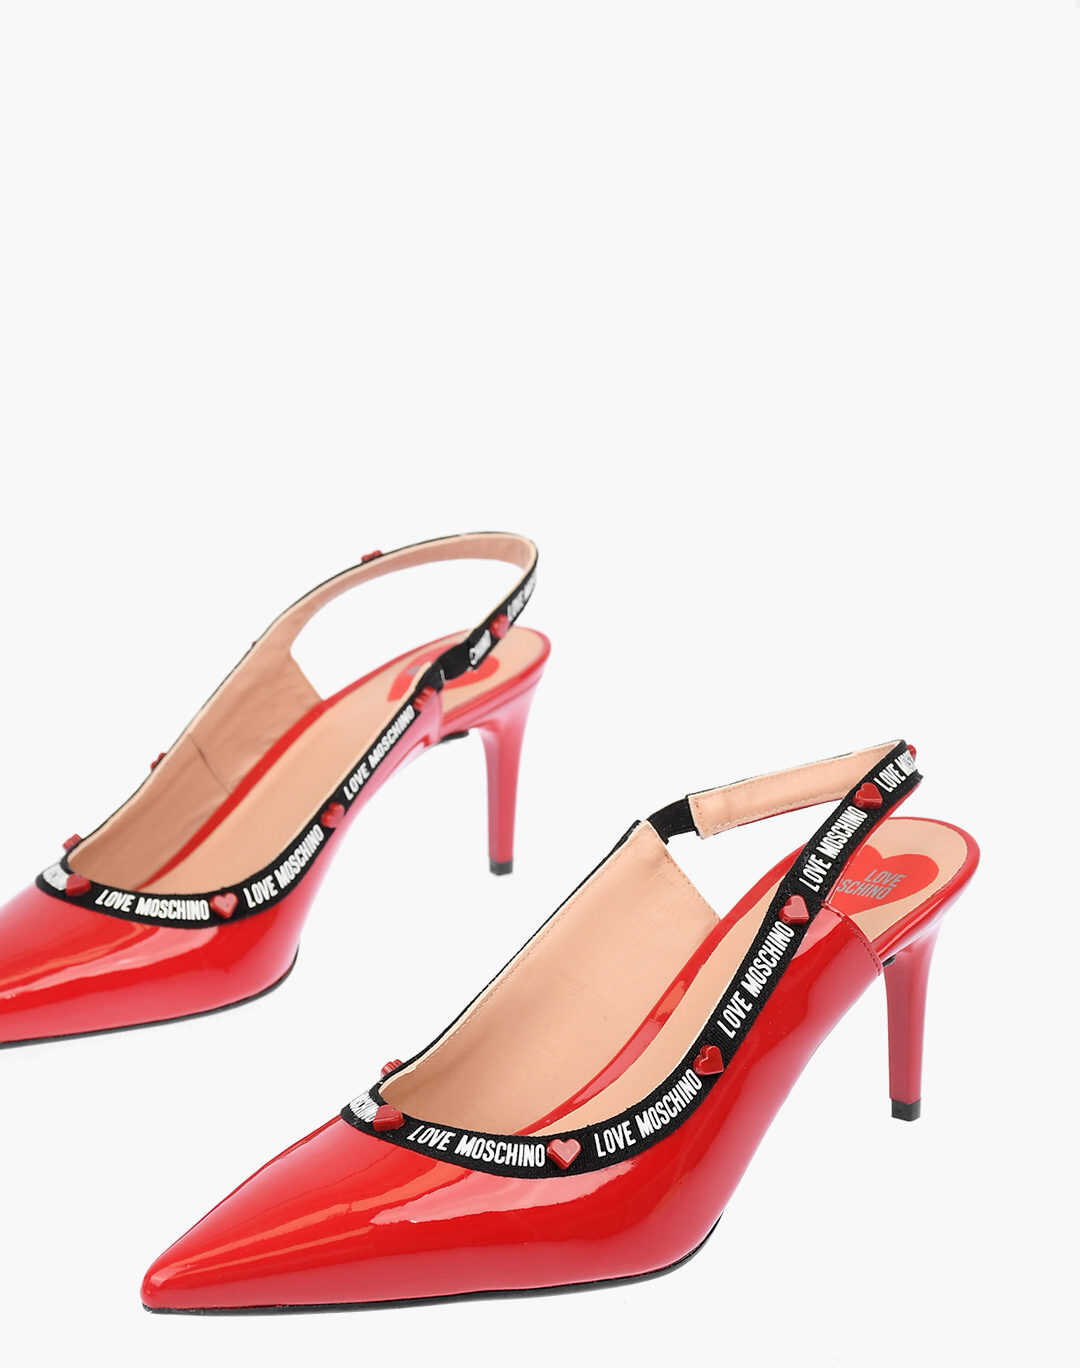 Moschino Love Patent Leather Slingback Pumps With Logo Print 7Cm* Black image6